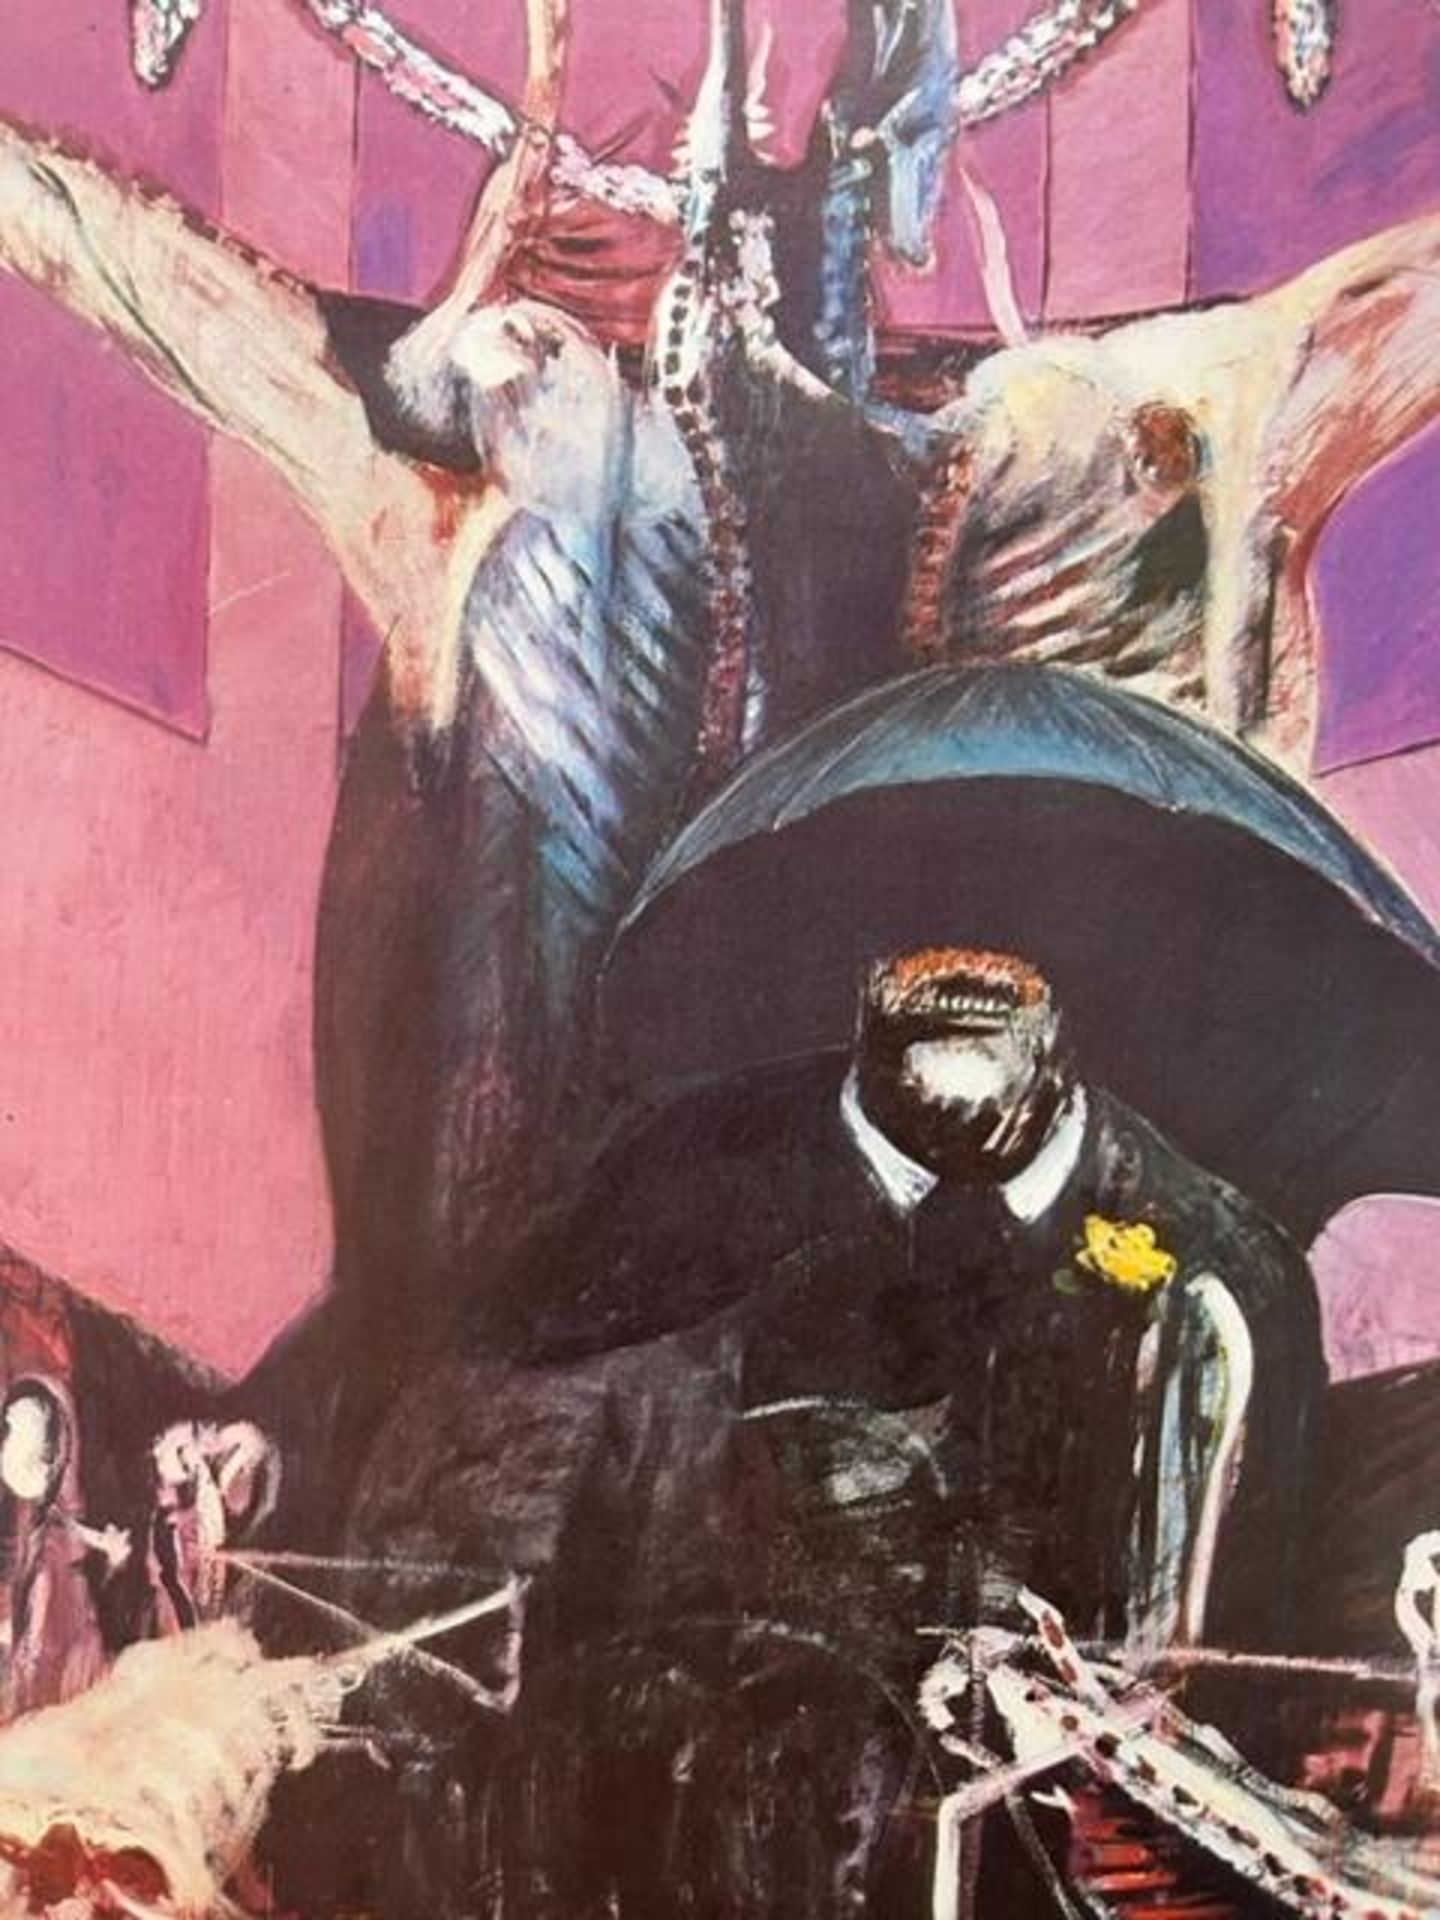 Francis Bacon "Painting" Print. - Image 6 of 12